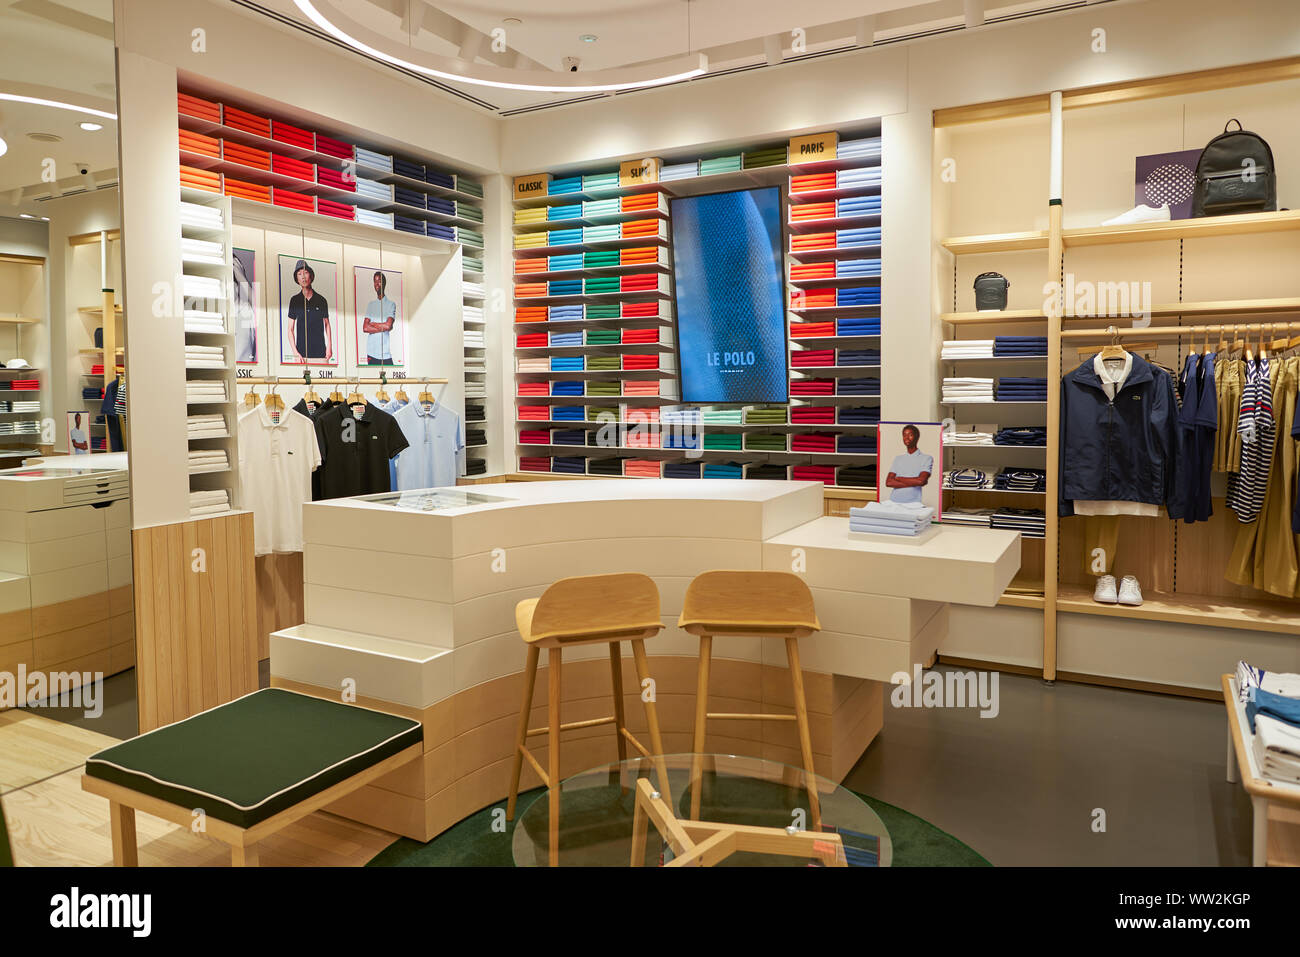 Page 3 - Lacoste Store High Resolution Stock Photography and Images - Alamy